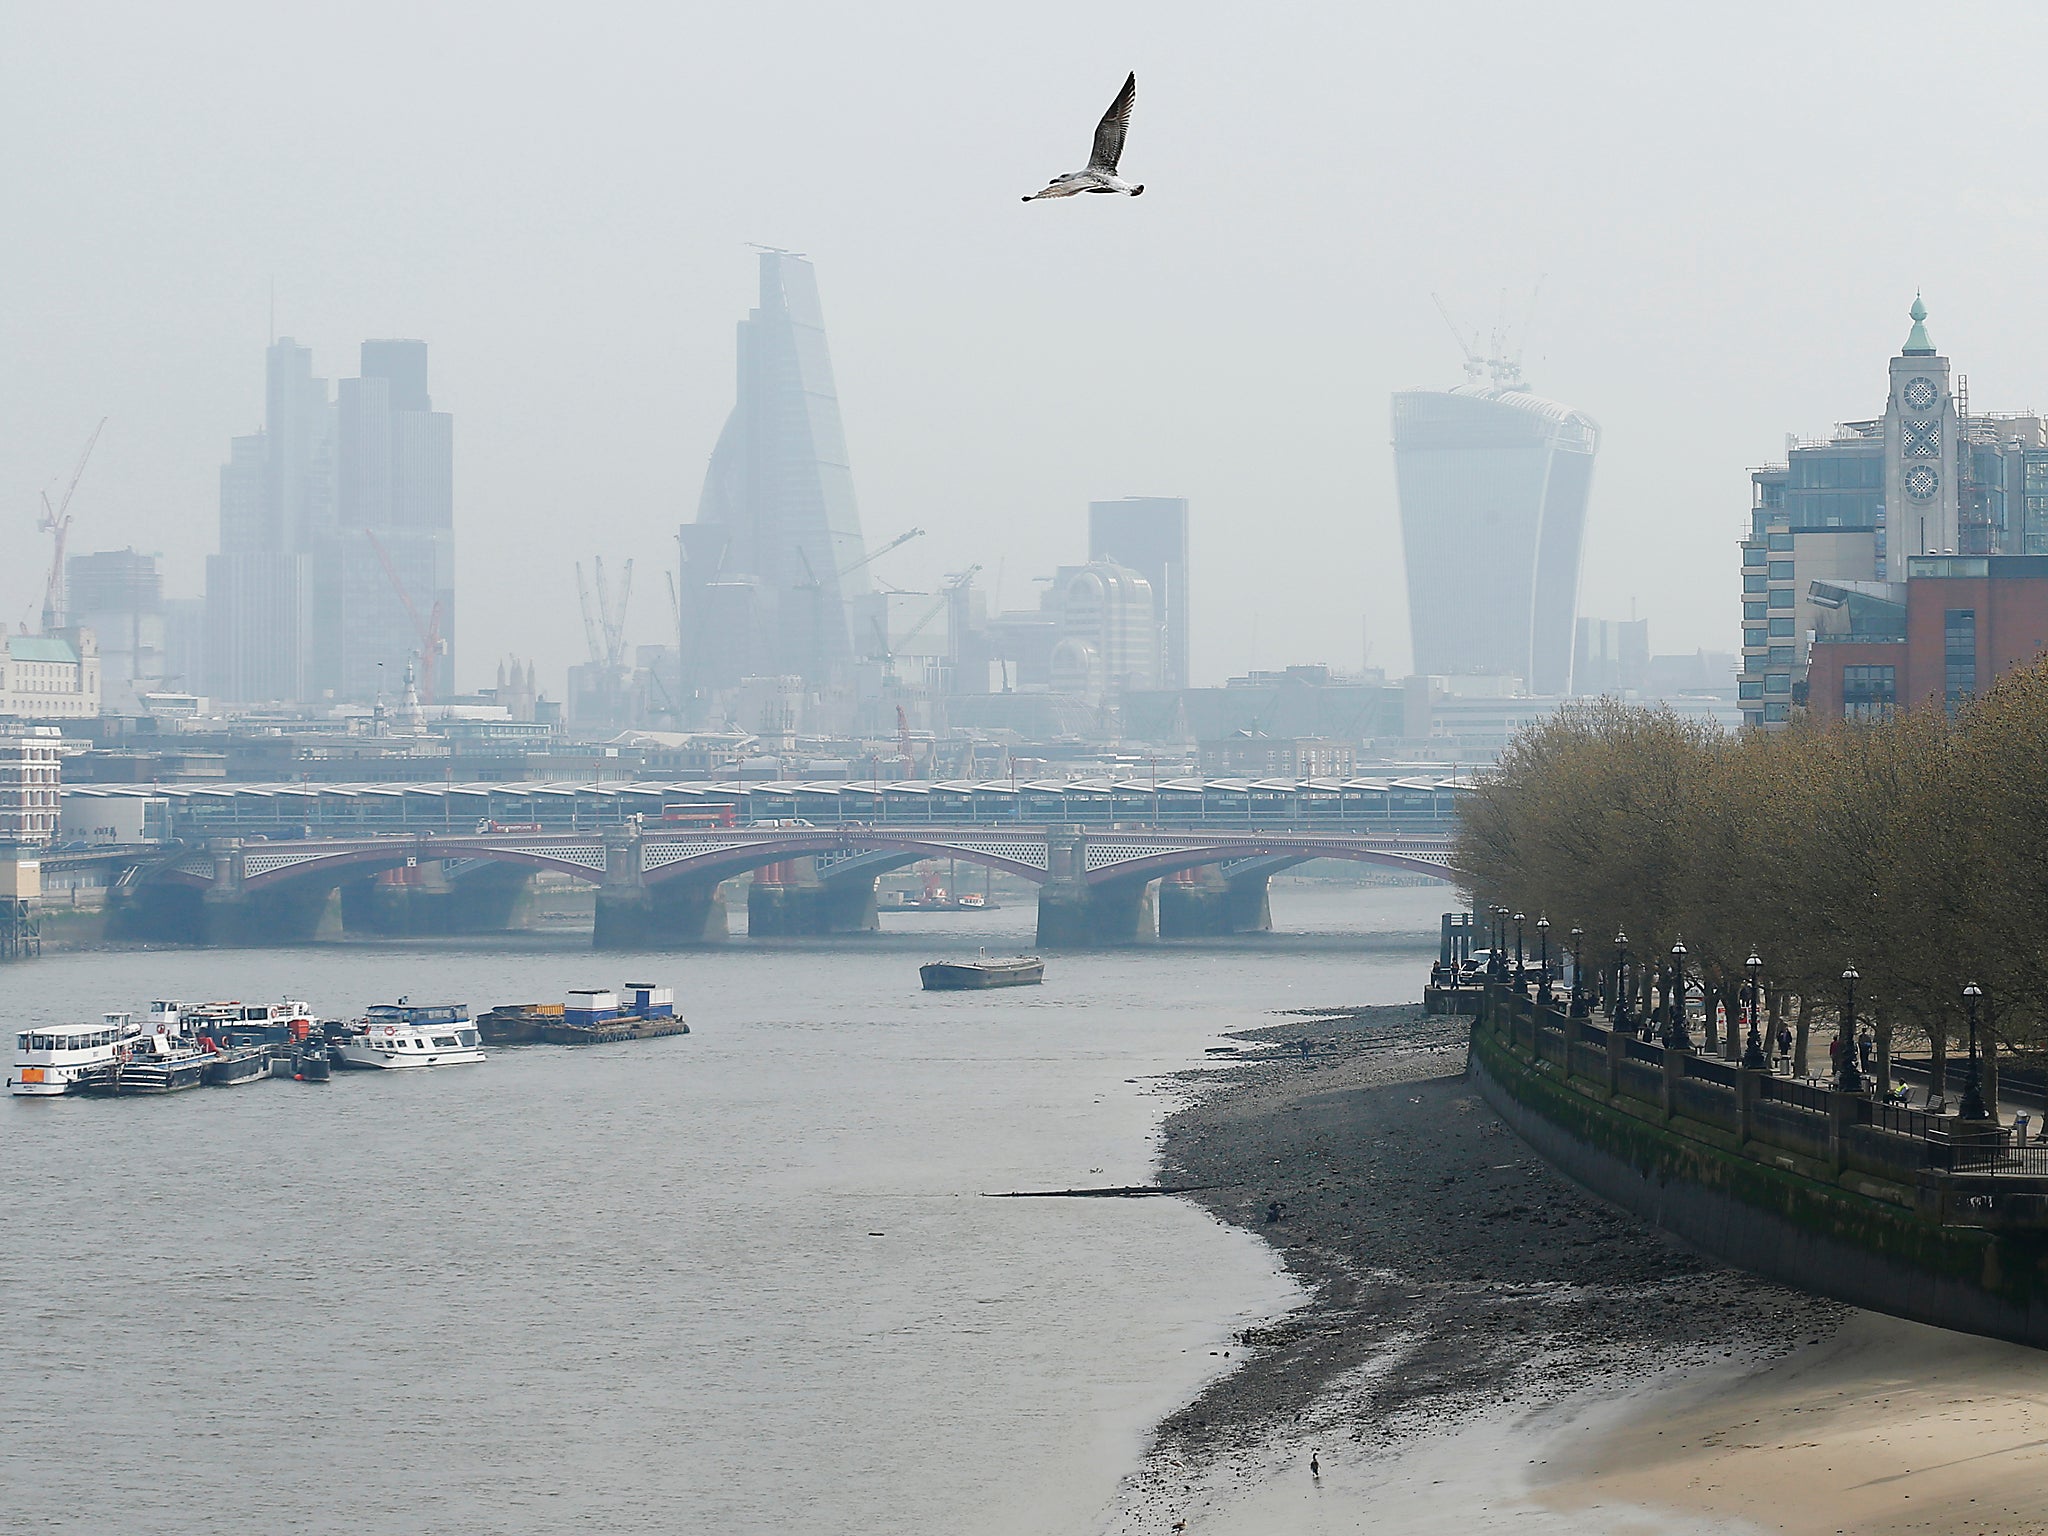 A seagull flies above the smog-filled skyline of the City of London